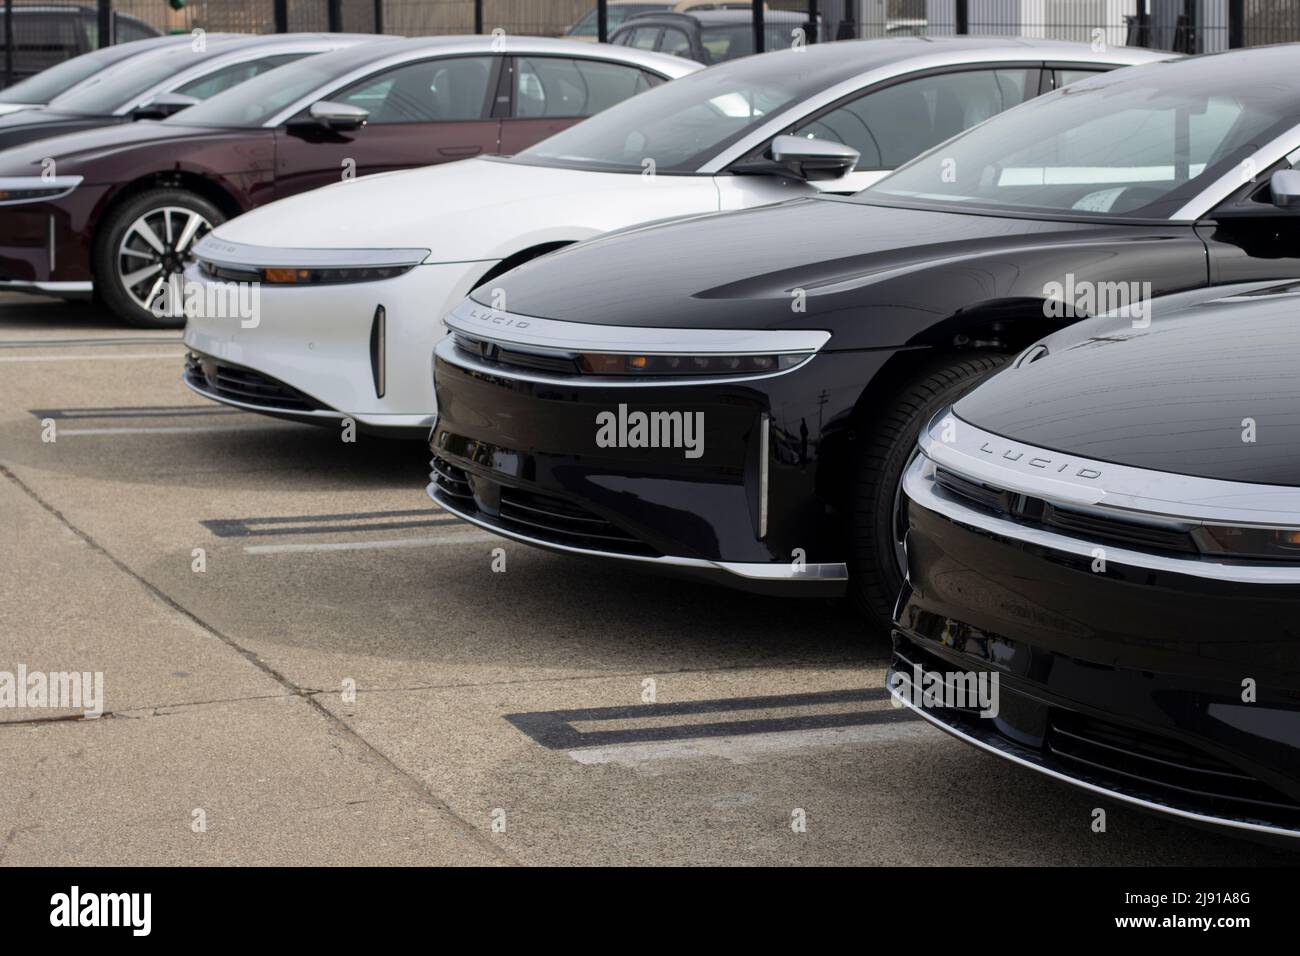 New Lucid Air luxury electric cars are seen outside a Lucid showroom in Millbrae, California, on Thursday, May 5, 2022. Stock Photo